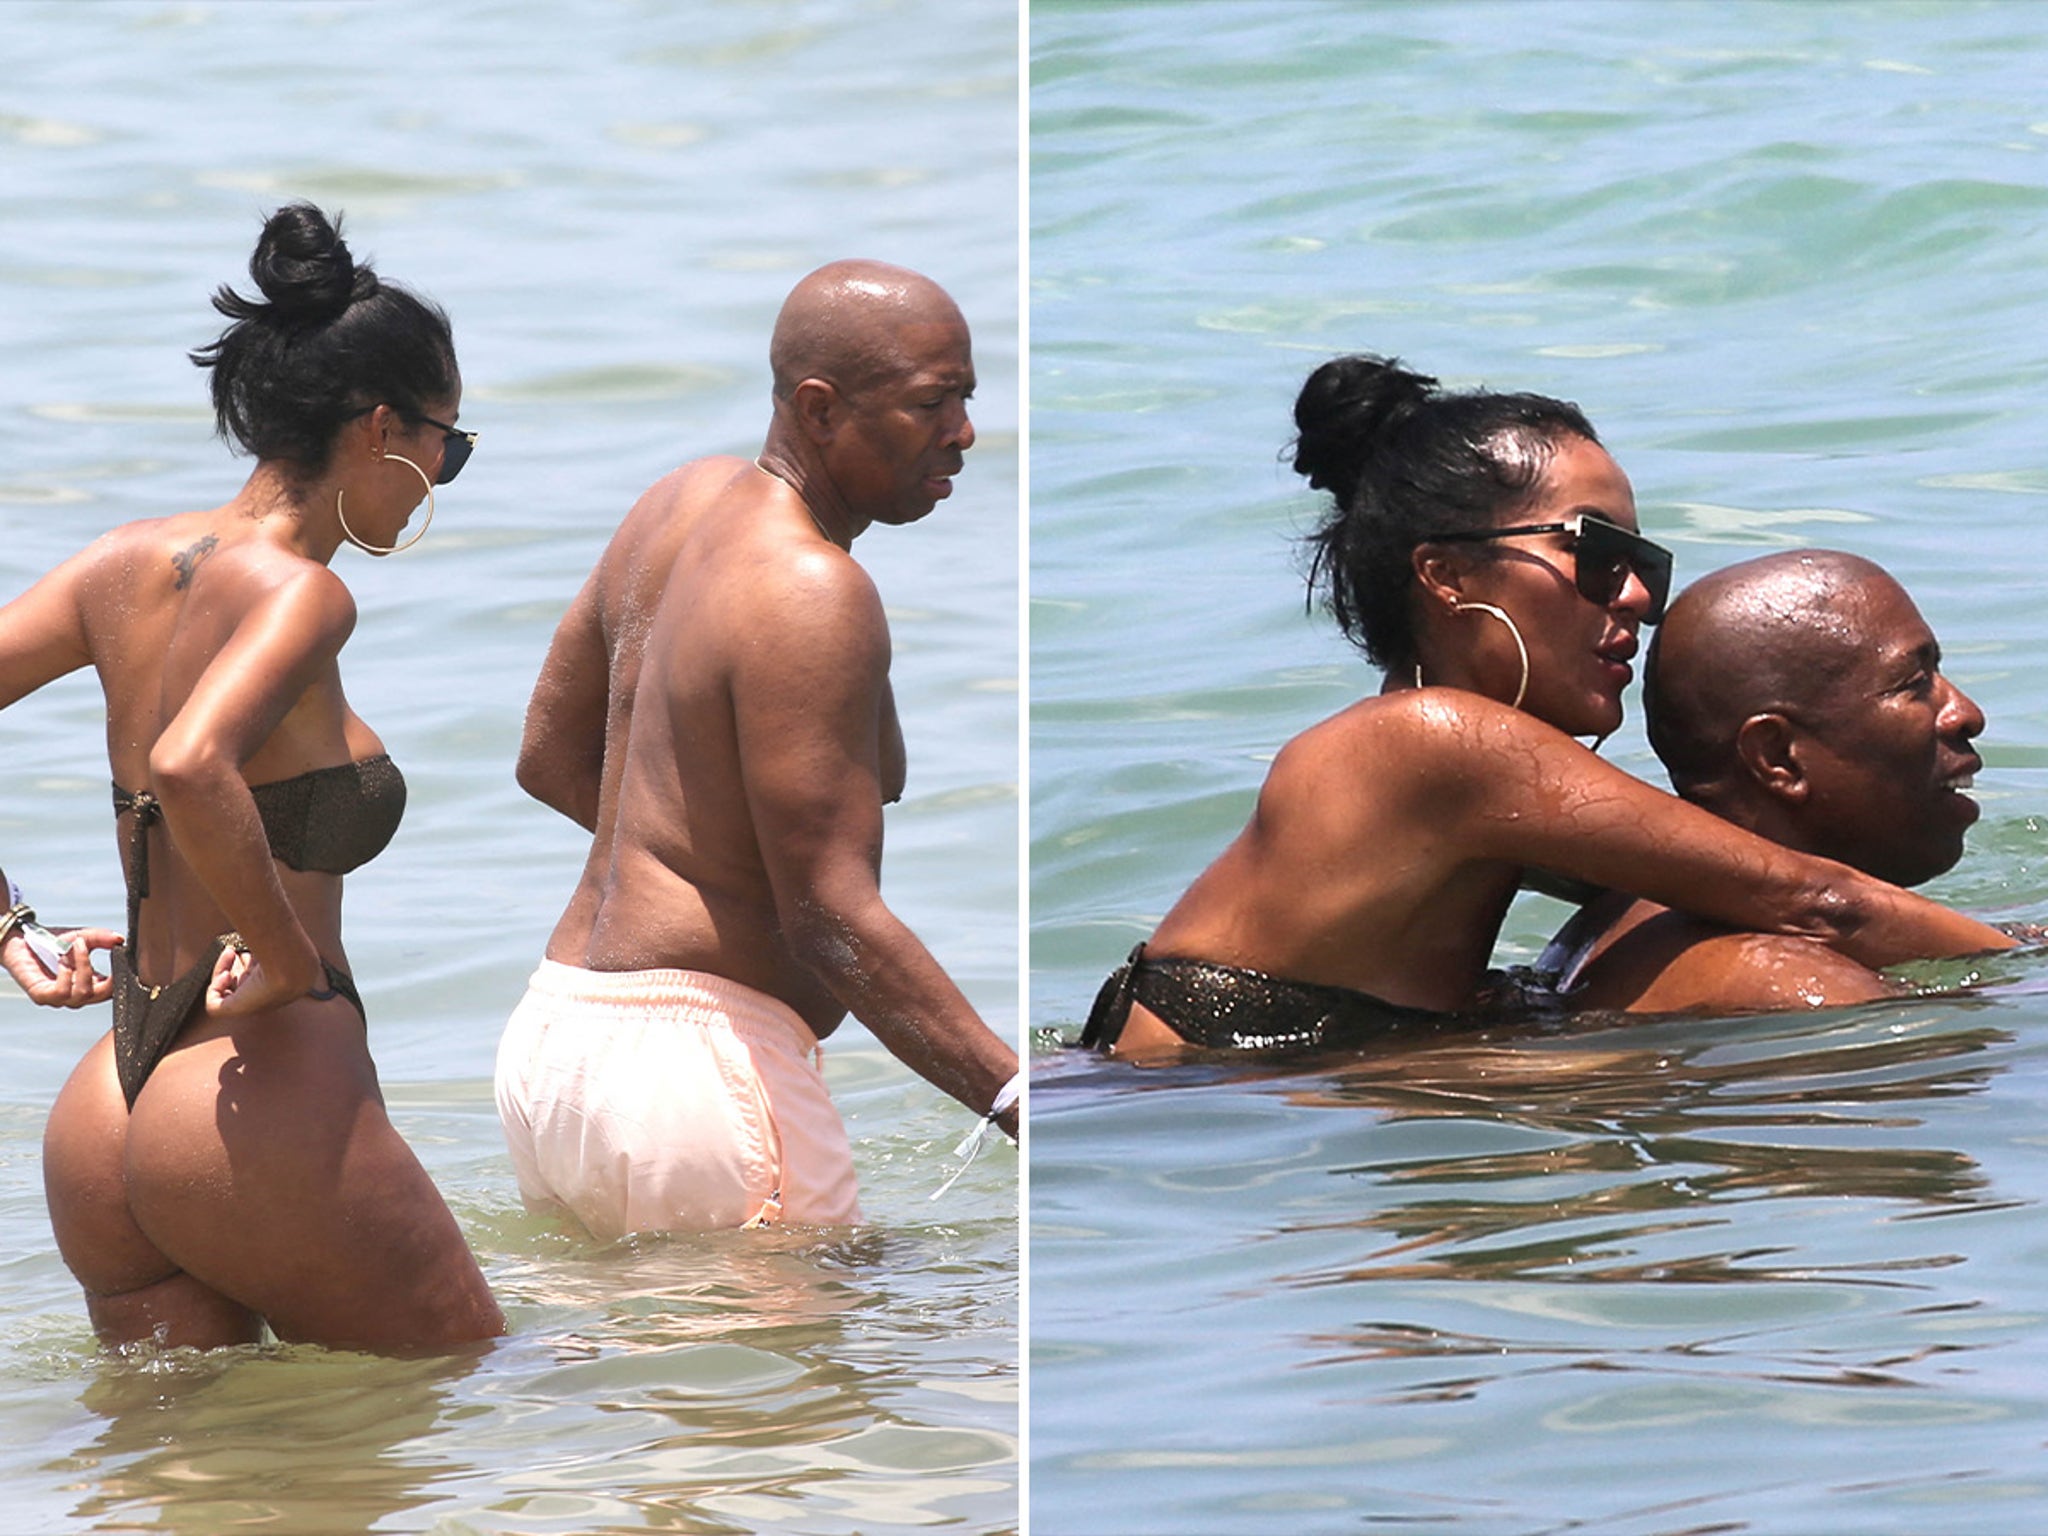 Kenny Smith hits the beach with rumored model girlfriend Aline Bernardes